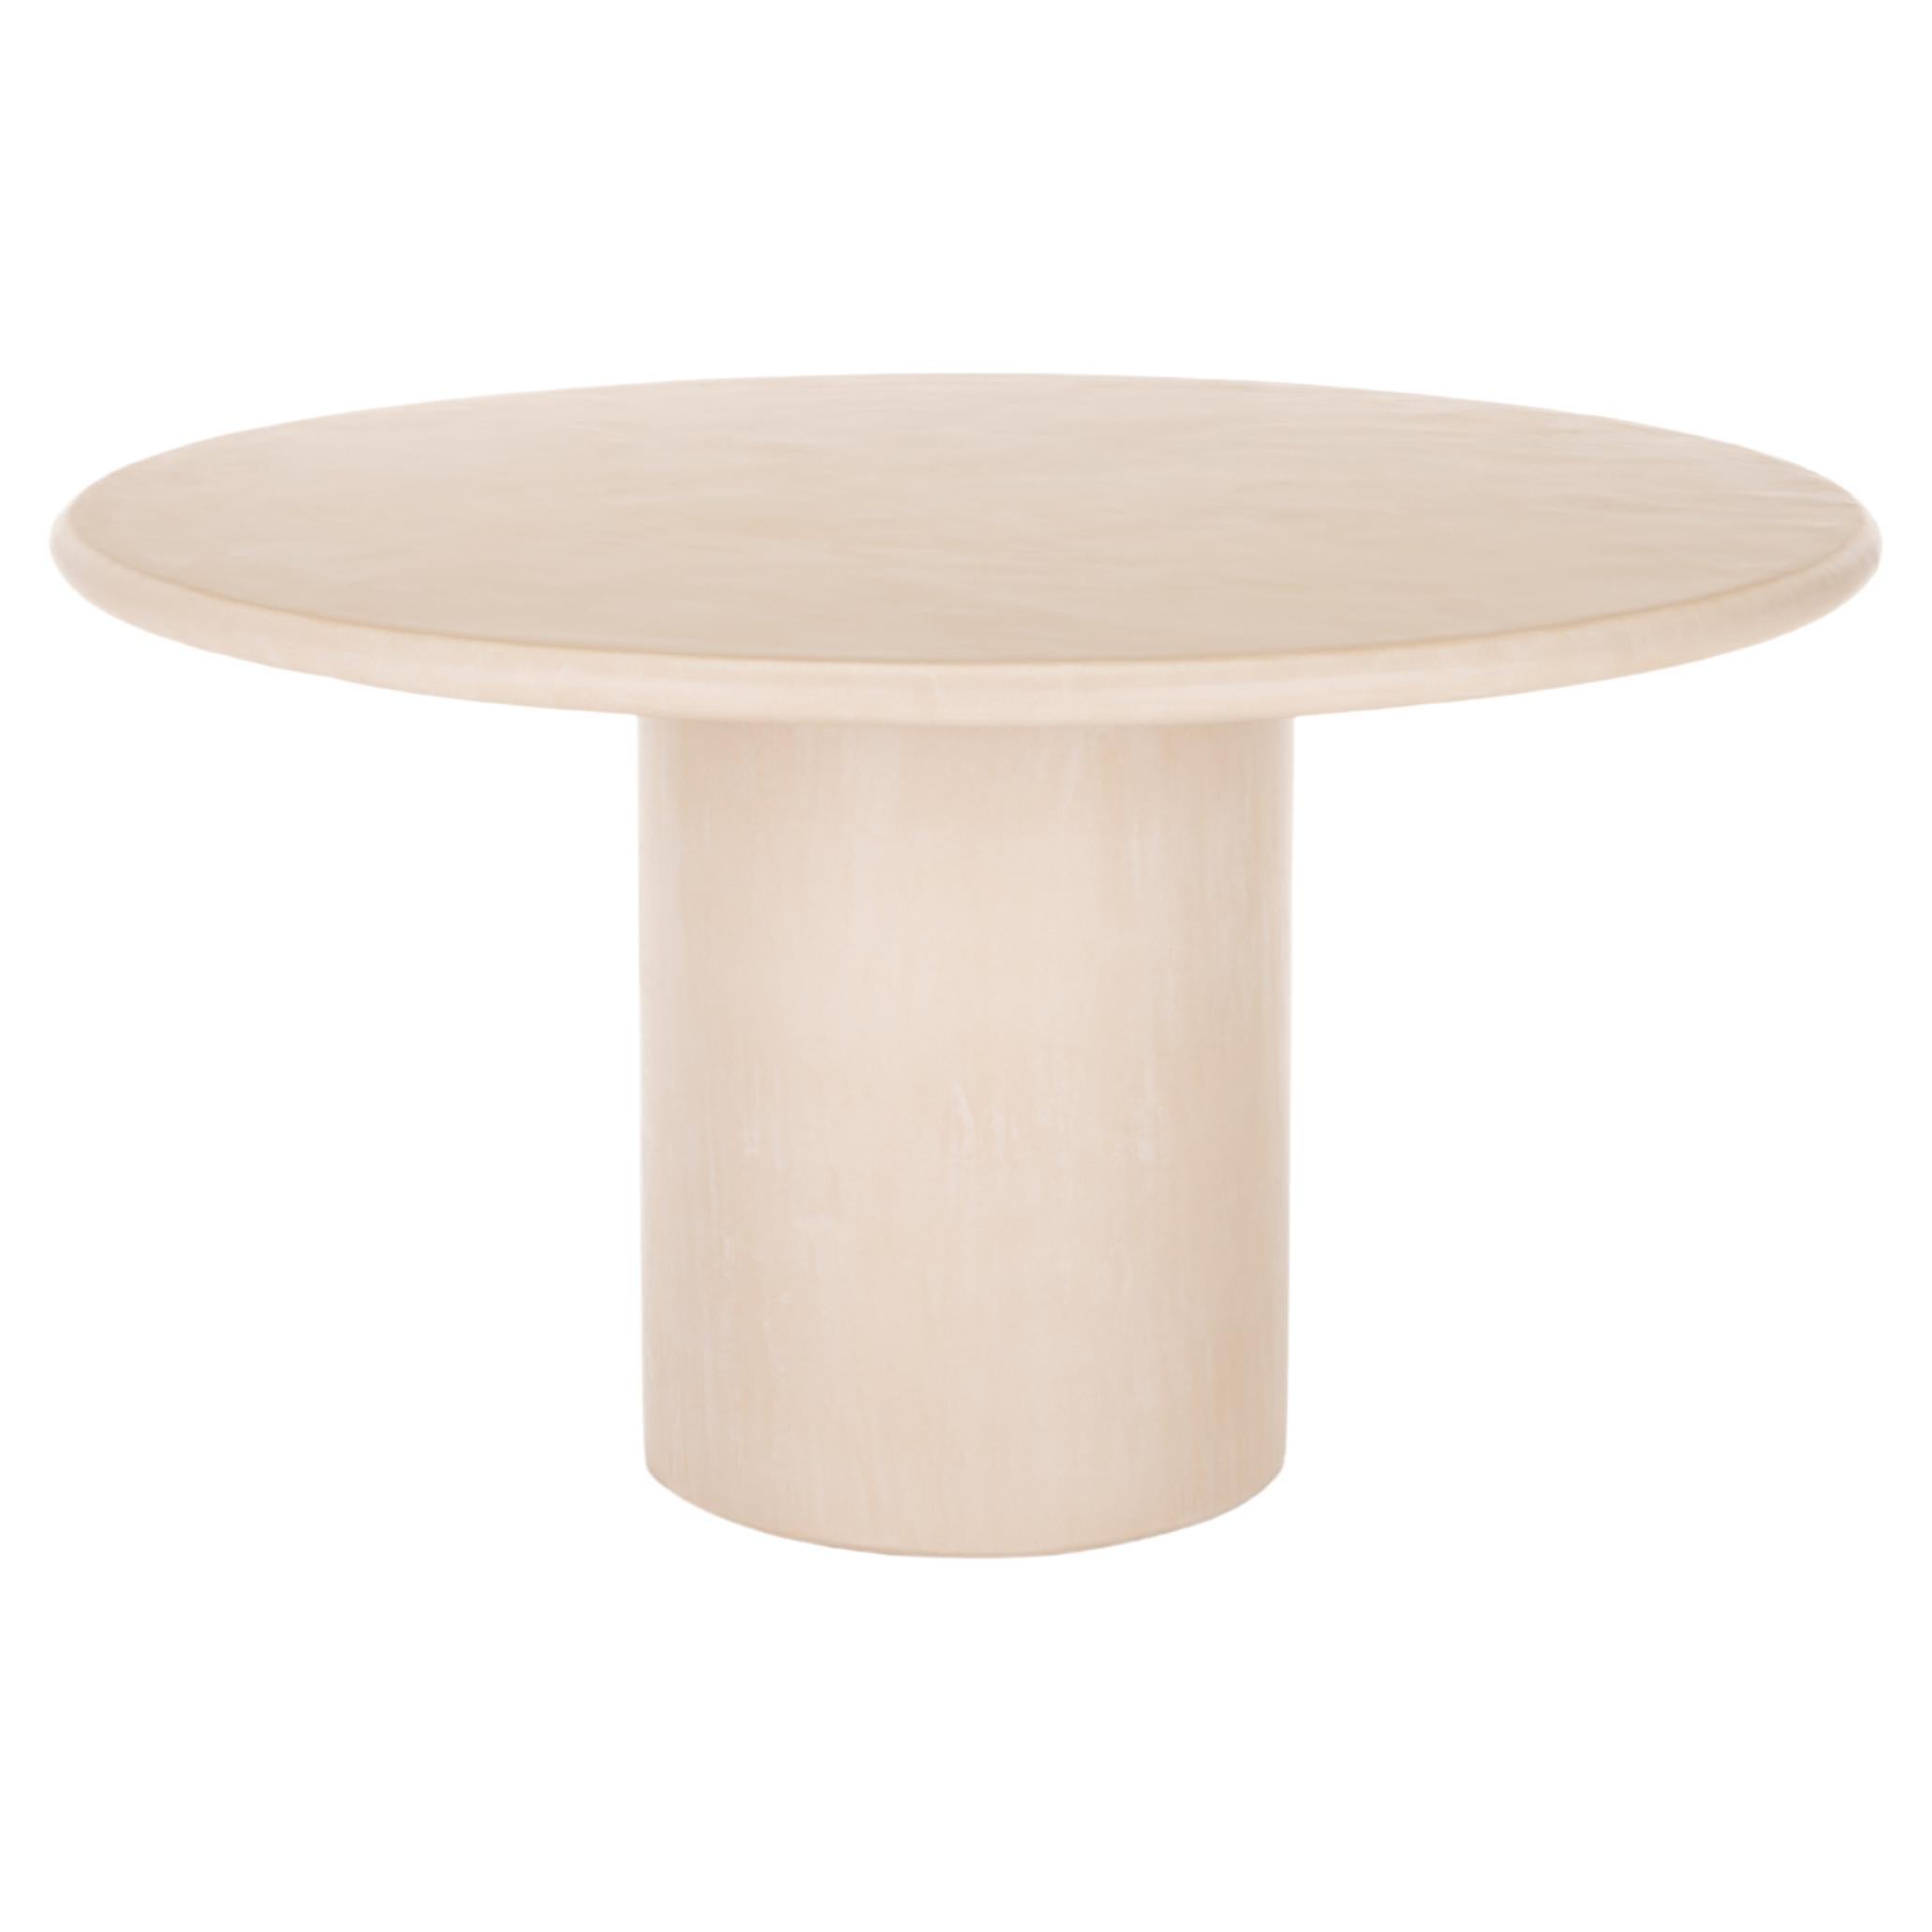 Natural Plaster Dining Table "Column" 160 by Isabelle Beaumont